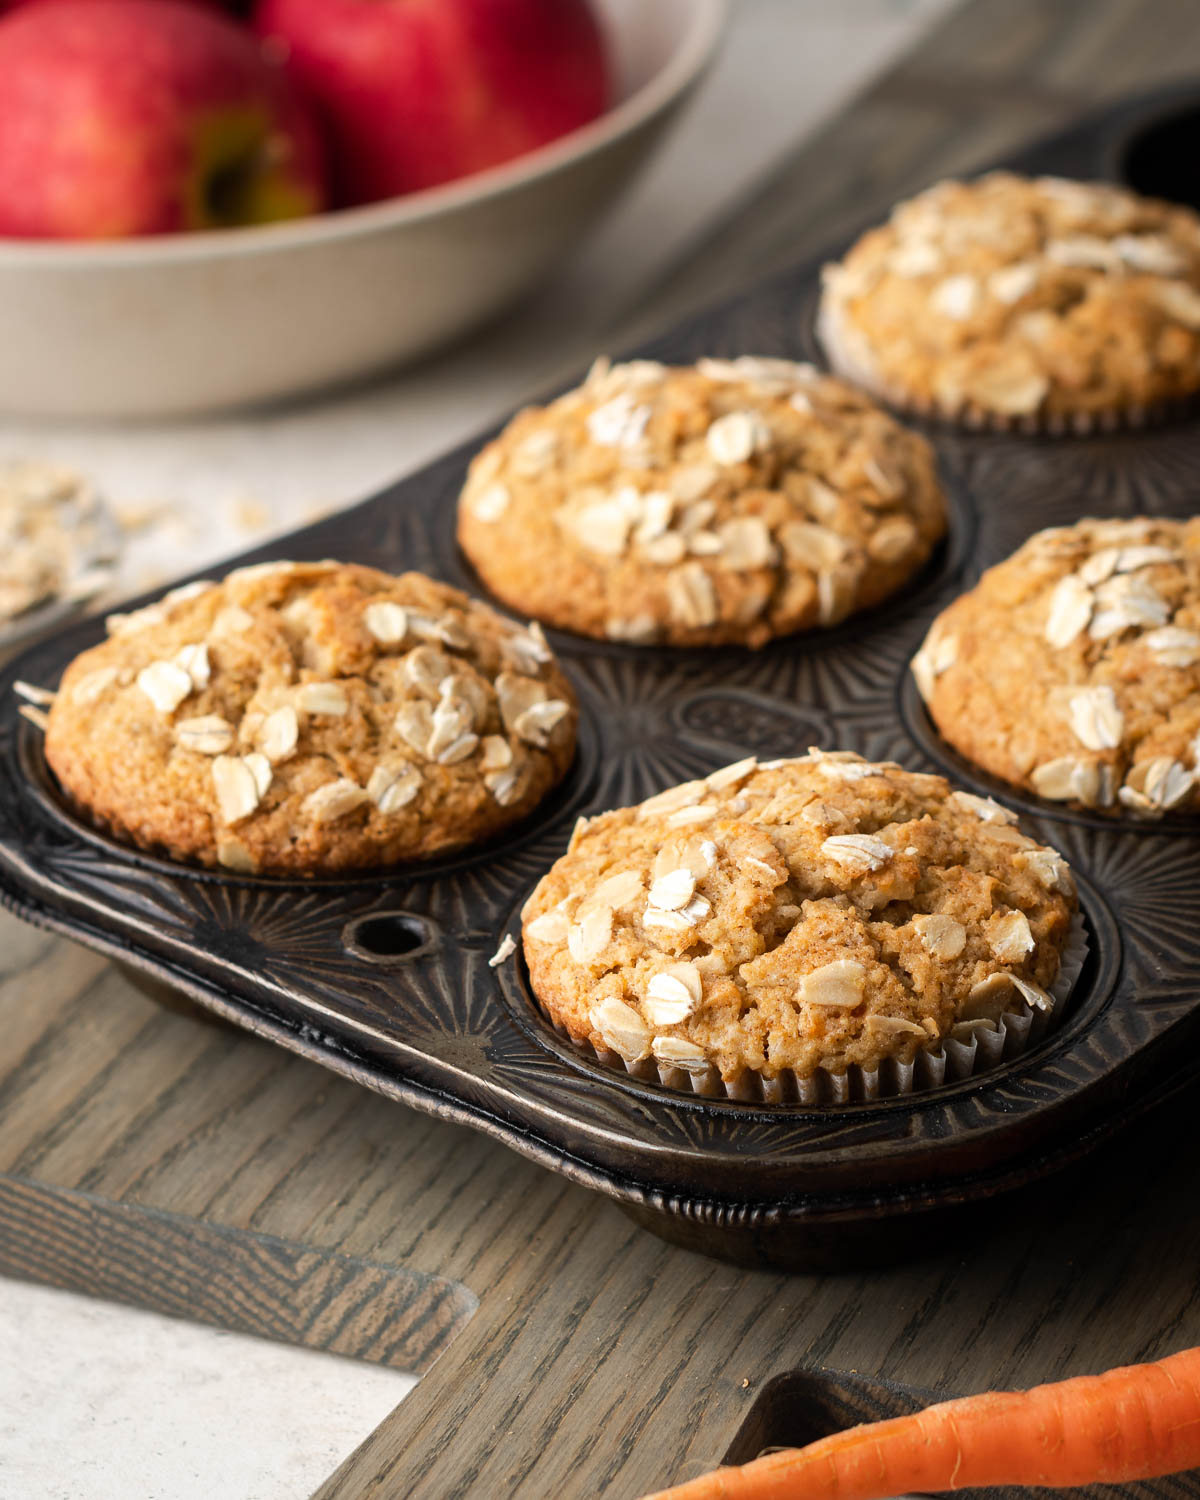 Freshly baked applesauce carrot muffins in a metal baking tin.